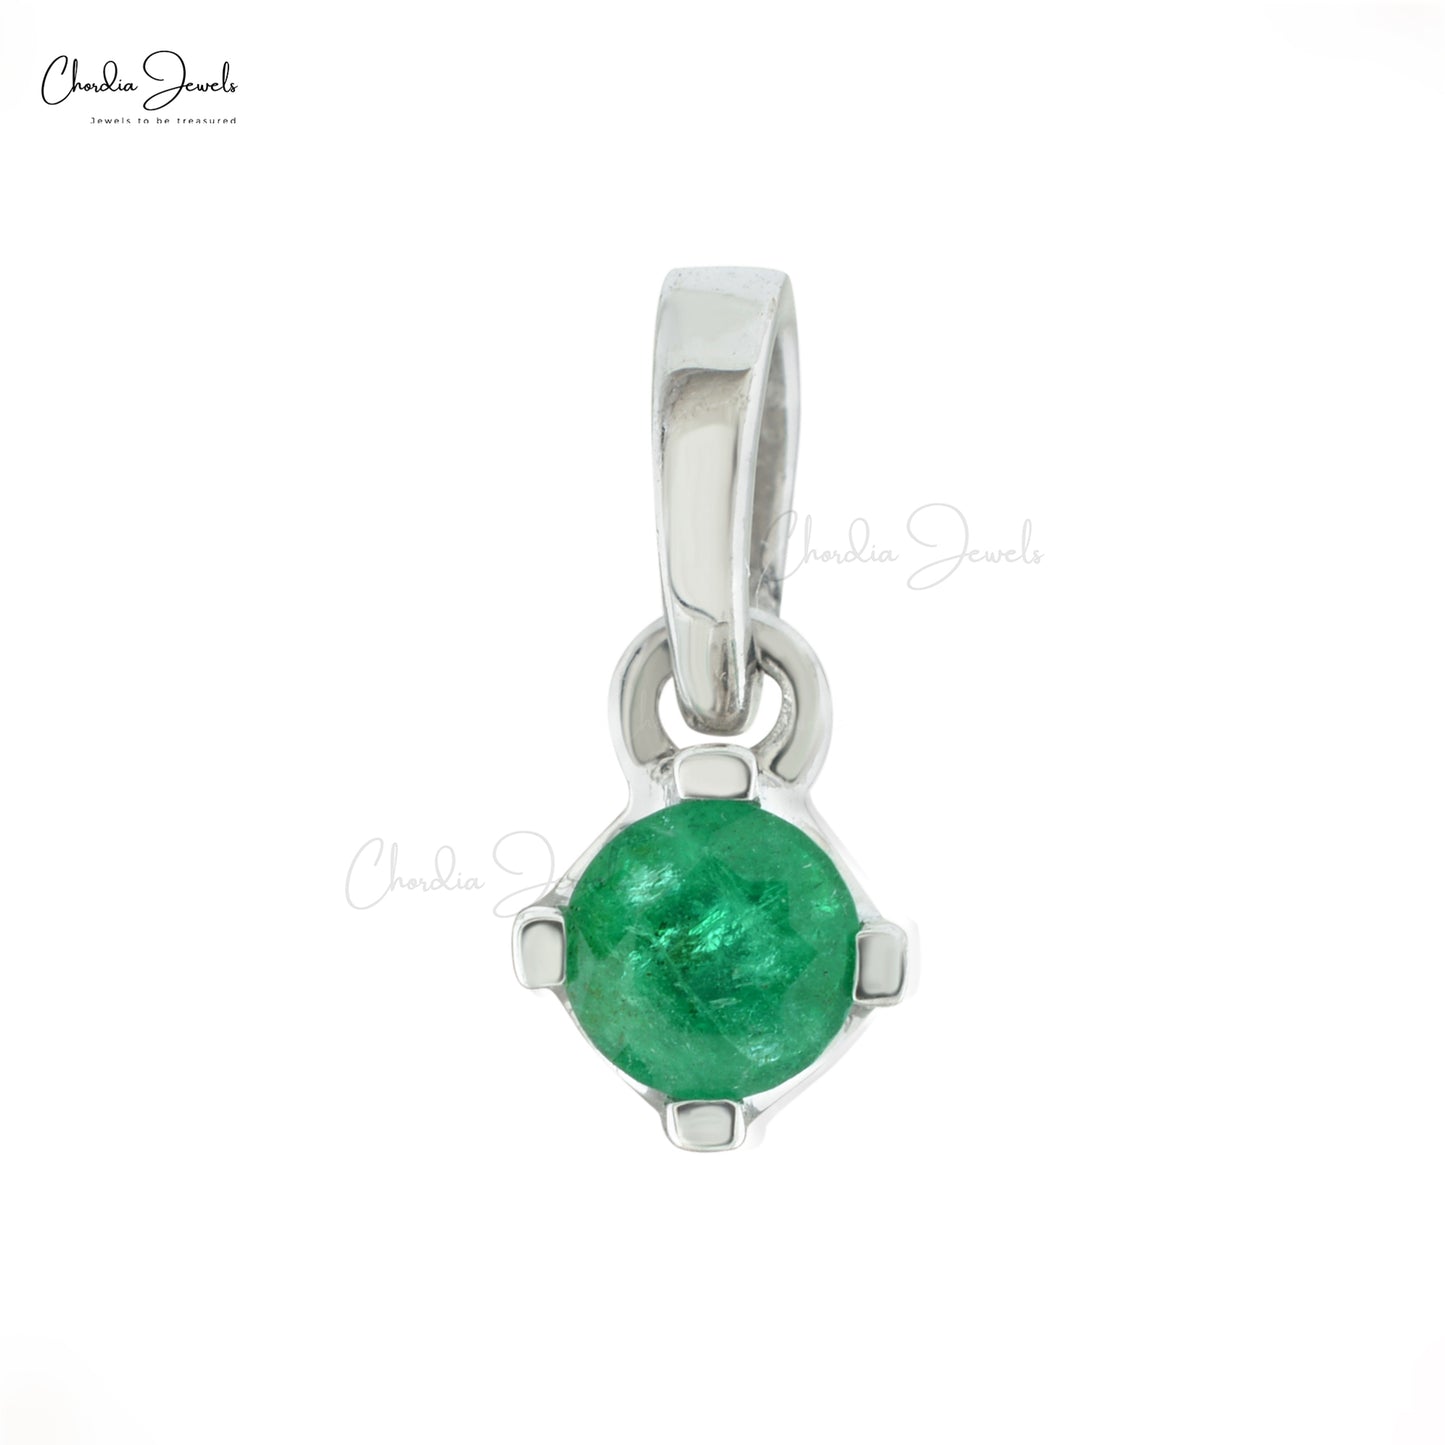 Natural Green Emerald 4mm Brilliant Round Cut Gemstone Pendant 14k Solid White Gold Prong Set Pendant For Her